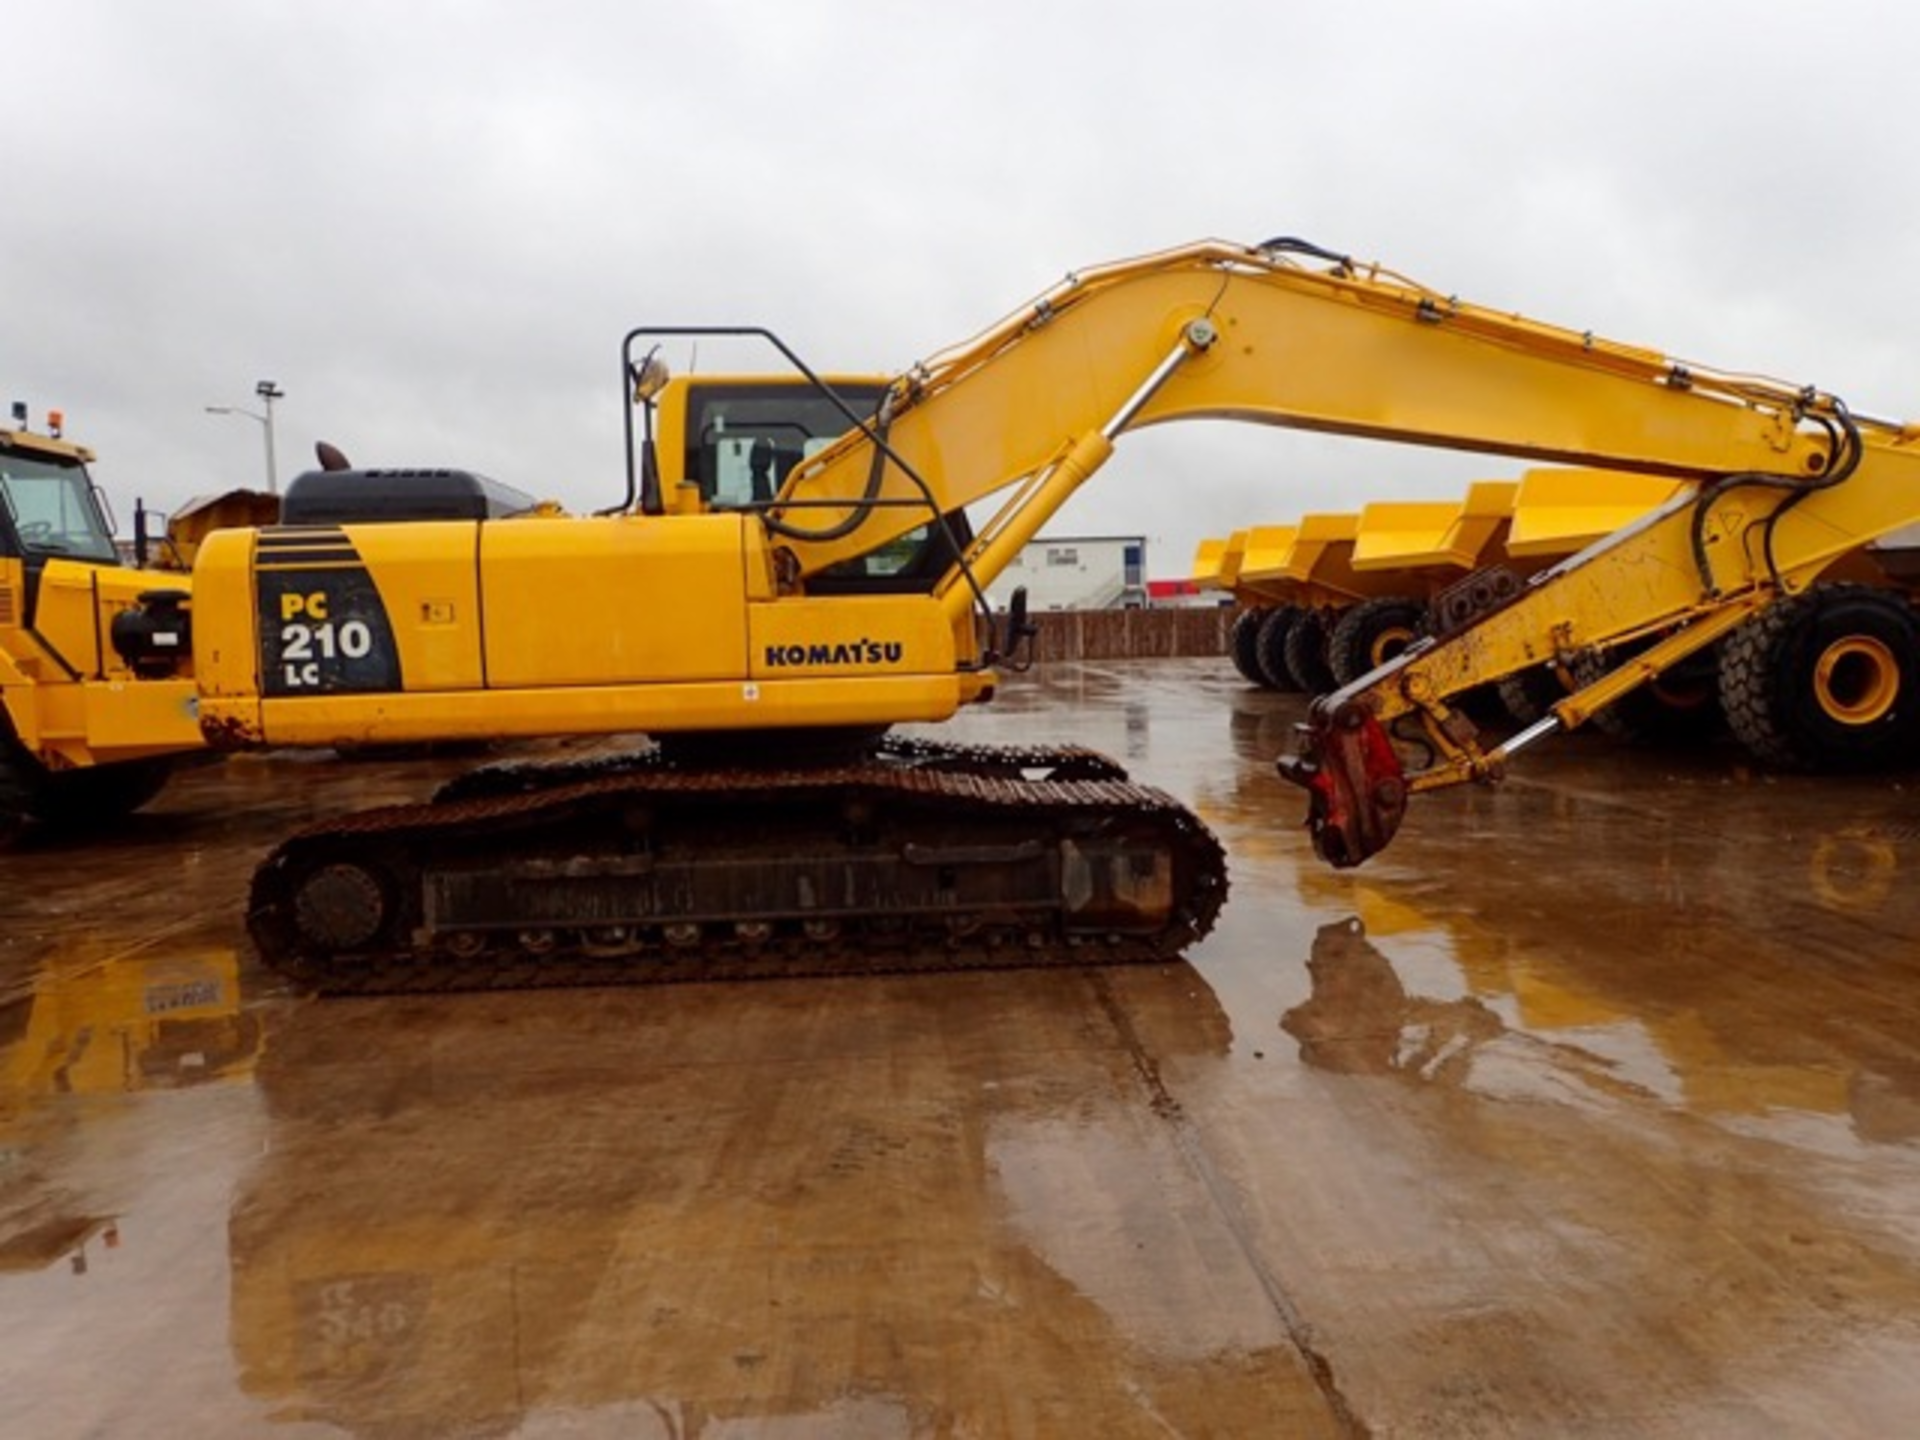 Komatsu PC210 LC 21 tonne steel tracked excavator Year: 2010 S/N: K53470 Recorded Hours: 8748